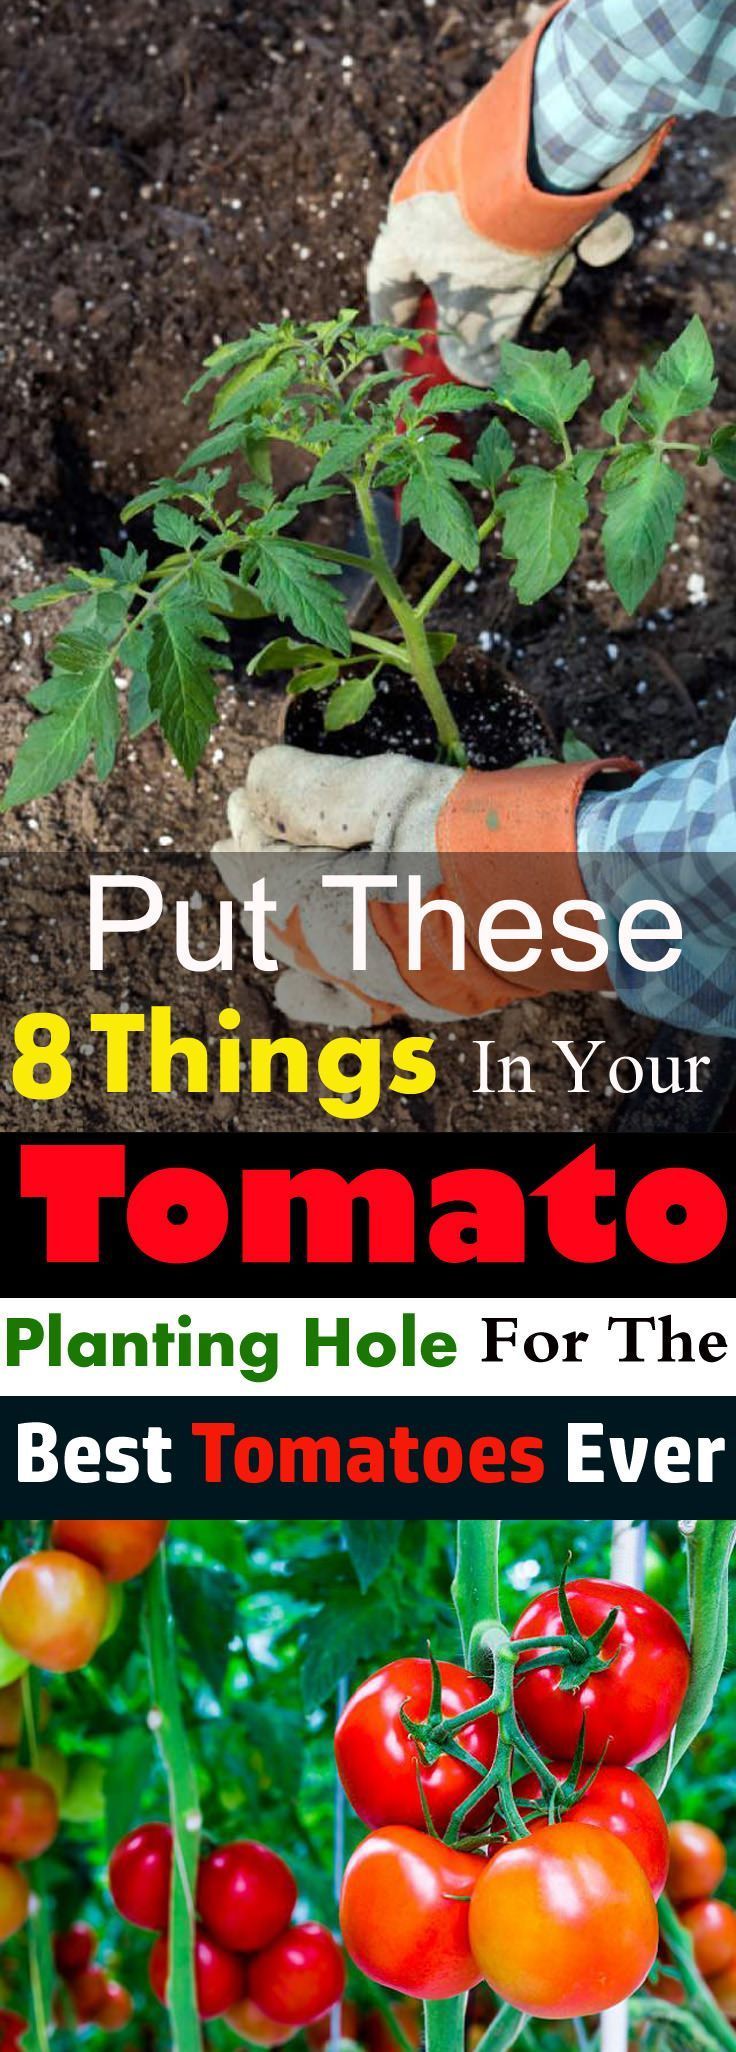 Put These 8 Things in Your TOMATO Planting Hole For The Best Tomatoes Ever -   9 plants Pictures awesome
 ideas